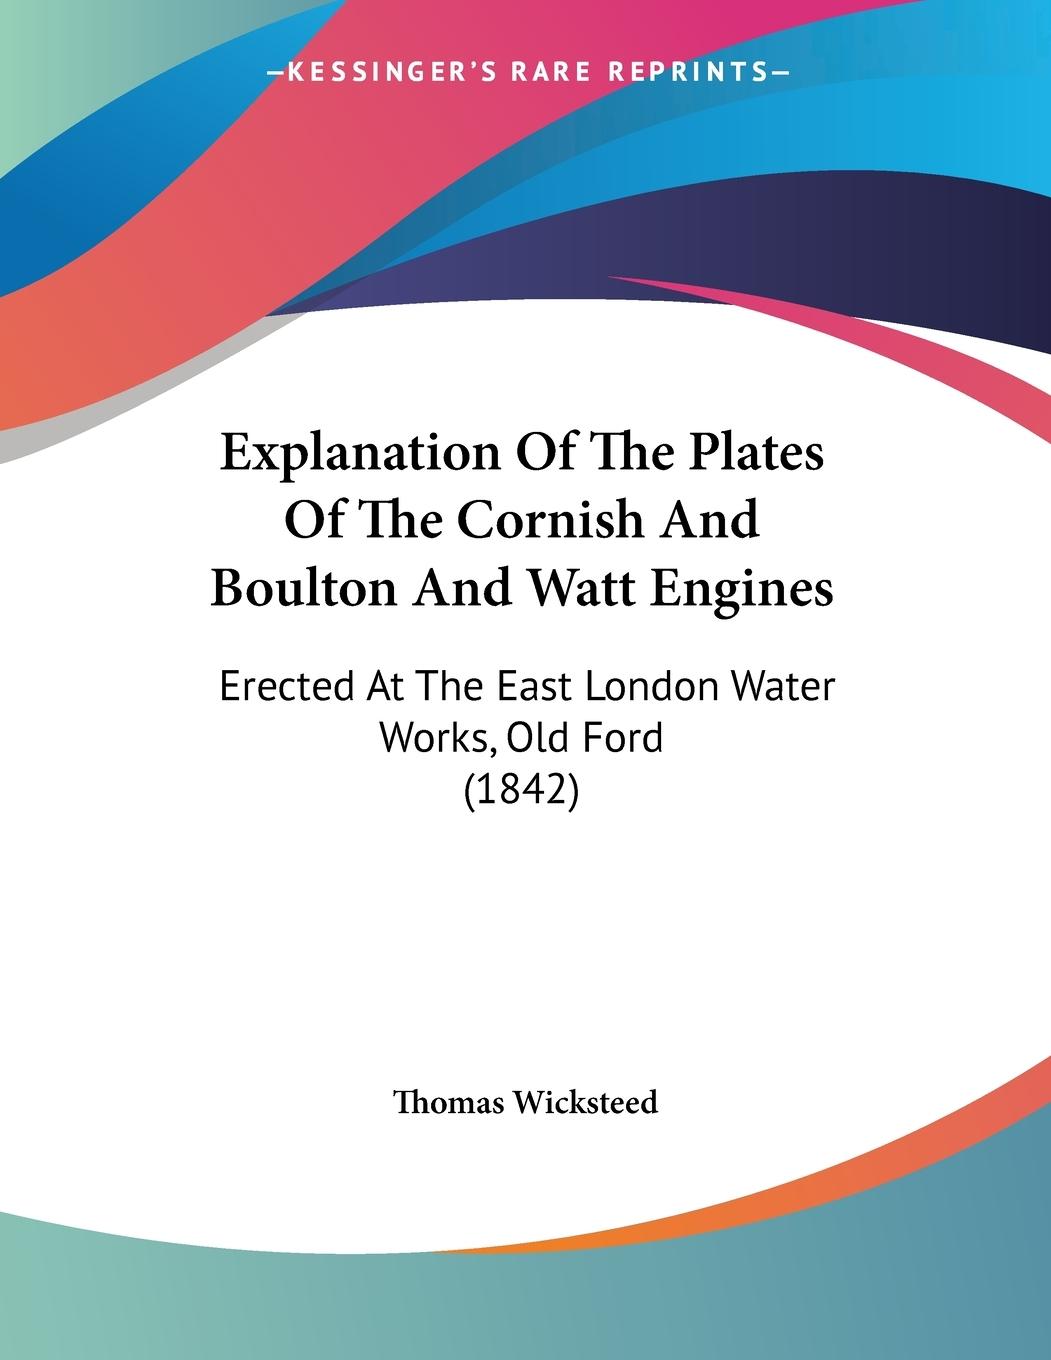 Explanation Of The Plates Of The Cornish And Boulton And Watt Engines - Wicksteed, Thomas